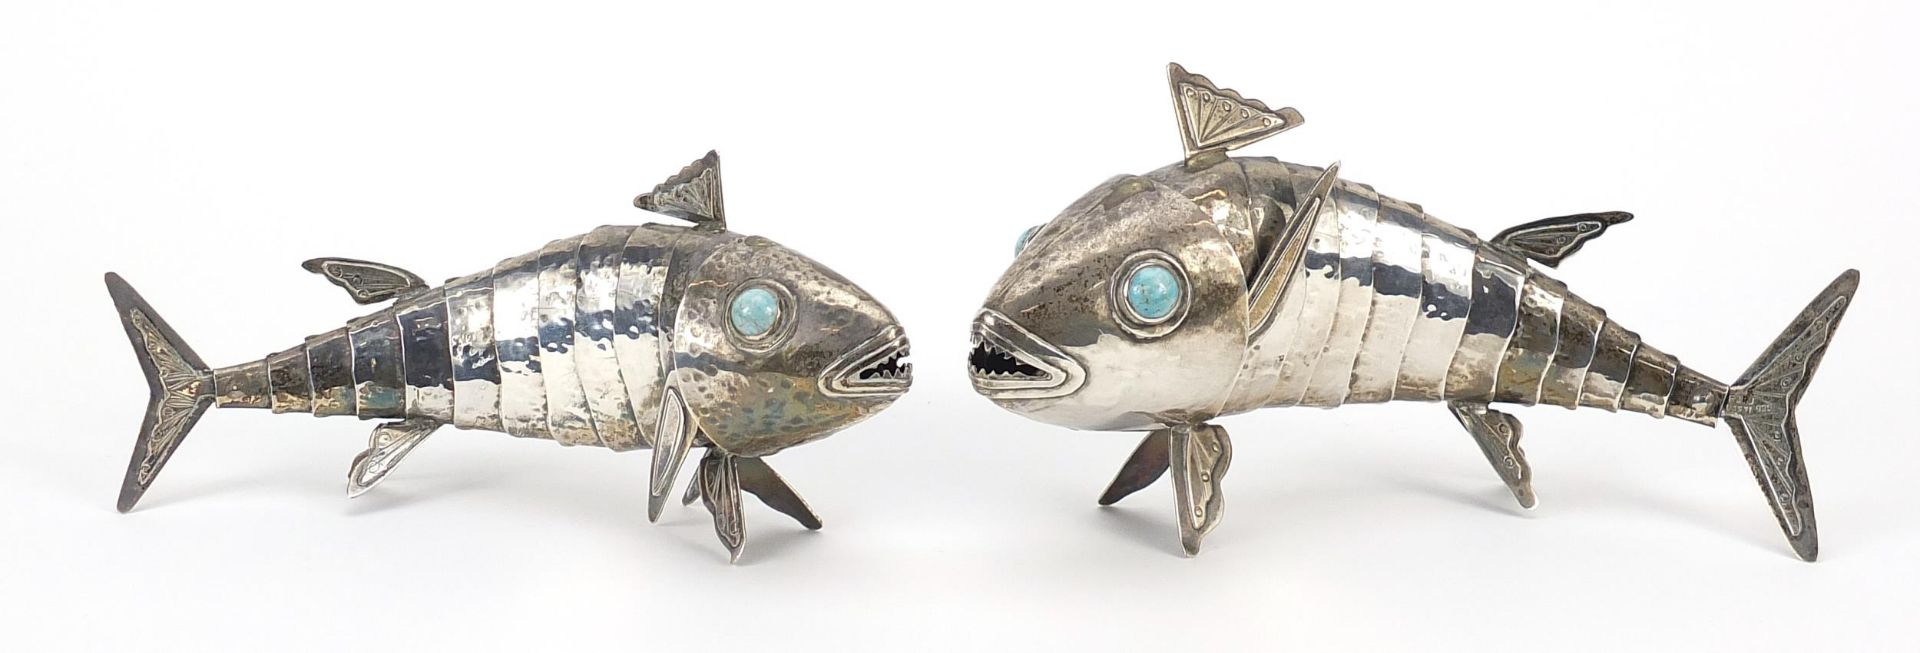 Graziella Laffi, two Peruvian articulated silver fish with turquoise eyes, 19cm and 17cm in